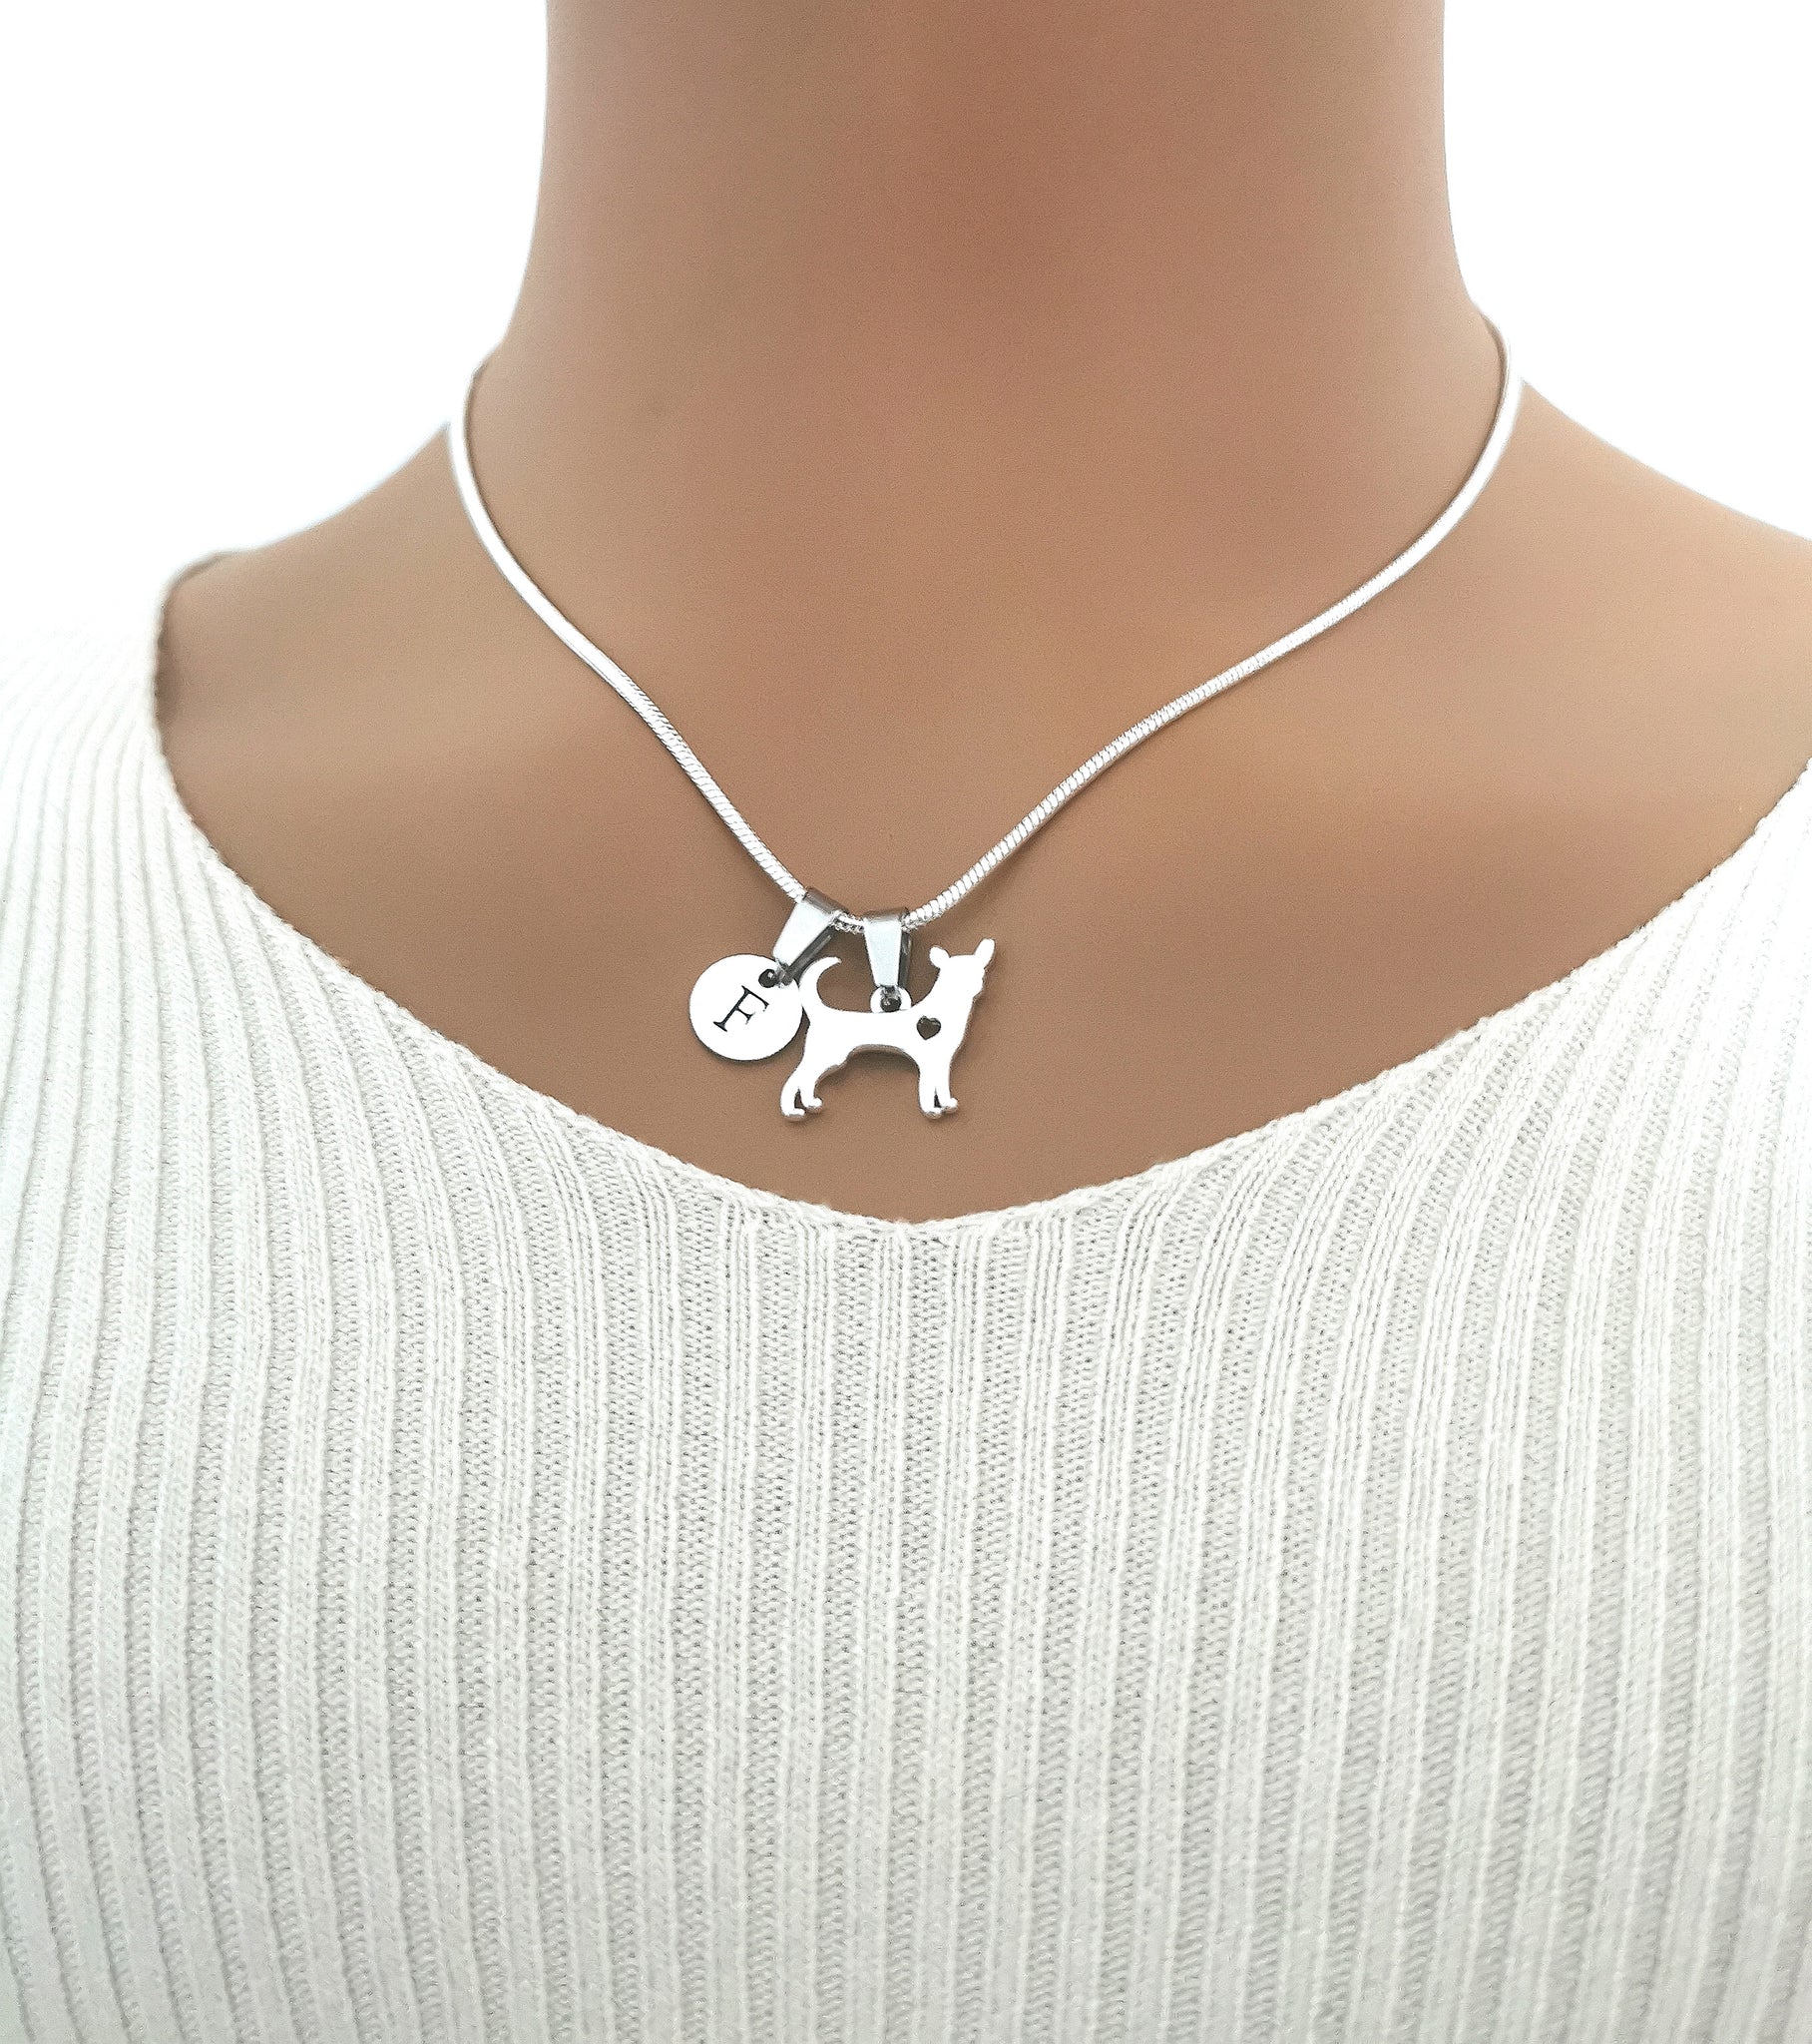 Sophisticated Silver Golden Retriever Necklace - Stylish Dog Charm Gift with 18" length - Perfect for Golden Retriever enthusiasts - YouLoveYouShop.